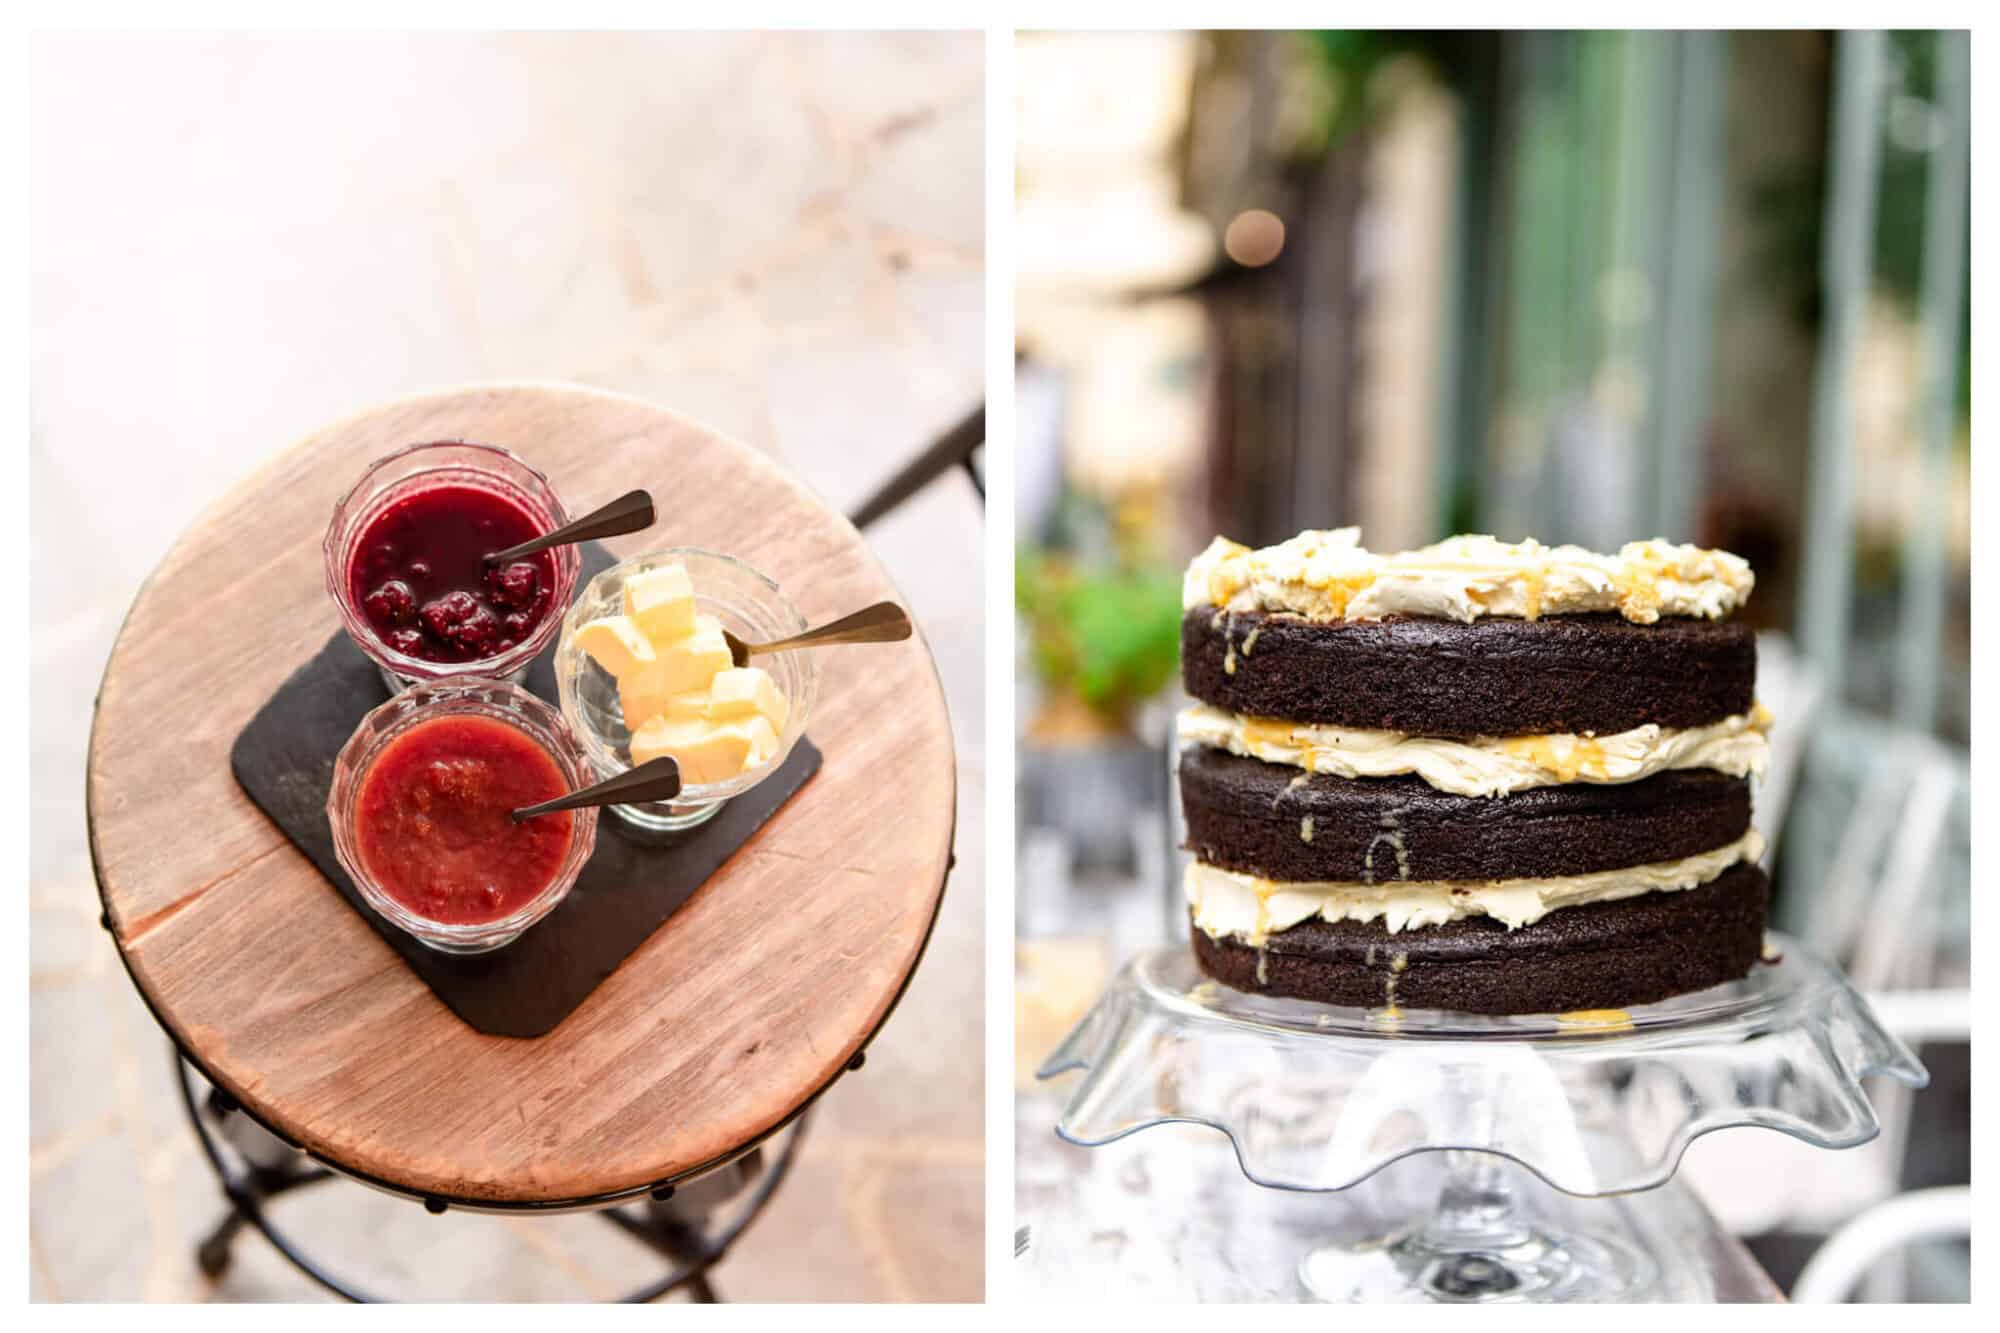 Left: Jars of red jams and a jar of butter sit atop a wooden table at Treize au Jardin, Right: A layered chocolate cake sits on a glass cake holder at Treize au Jardin